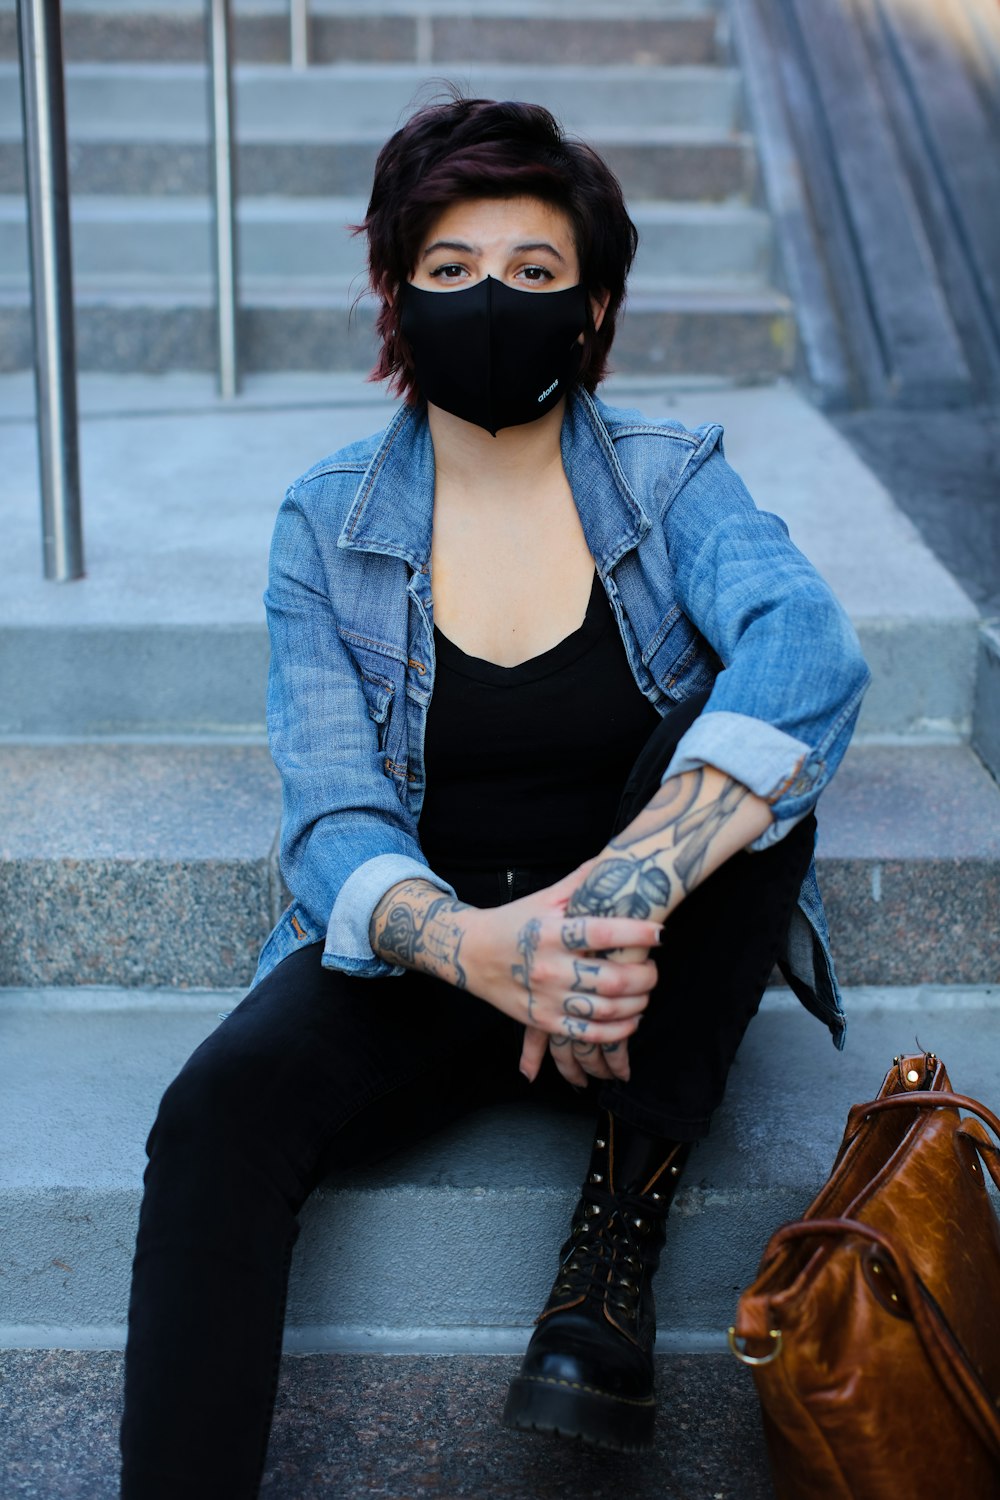 woman in blue denim jacket and black tank top wearing black mask sitting on concrete bench